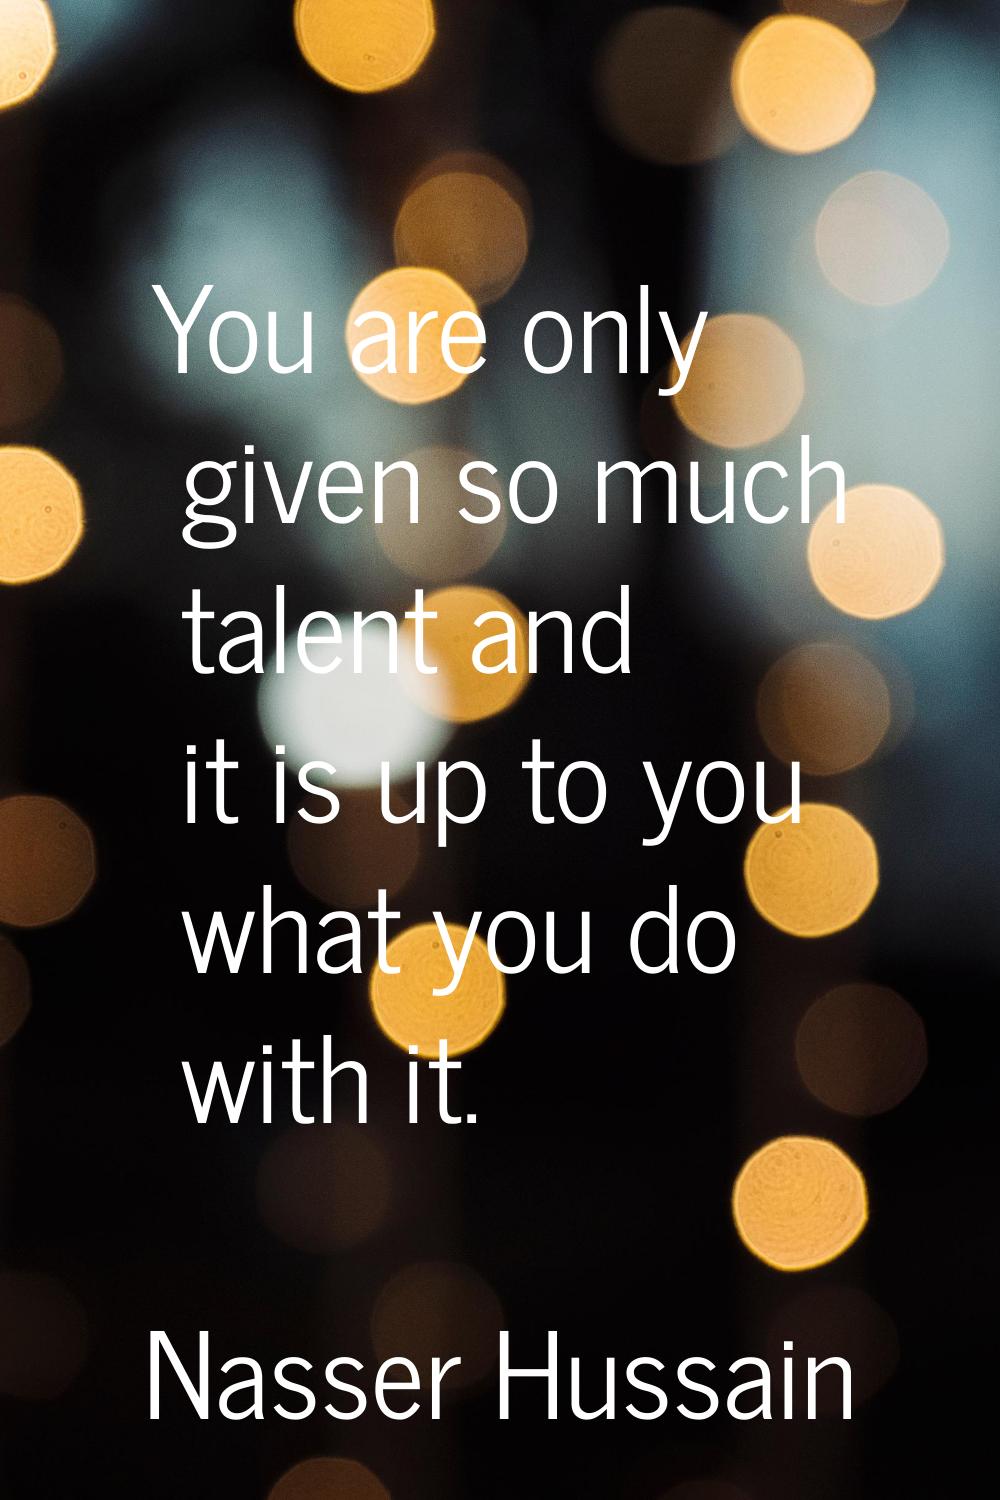 You are only given so much talent and it is up to you what you do with it.